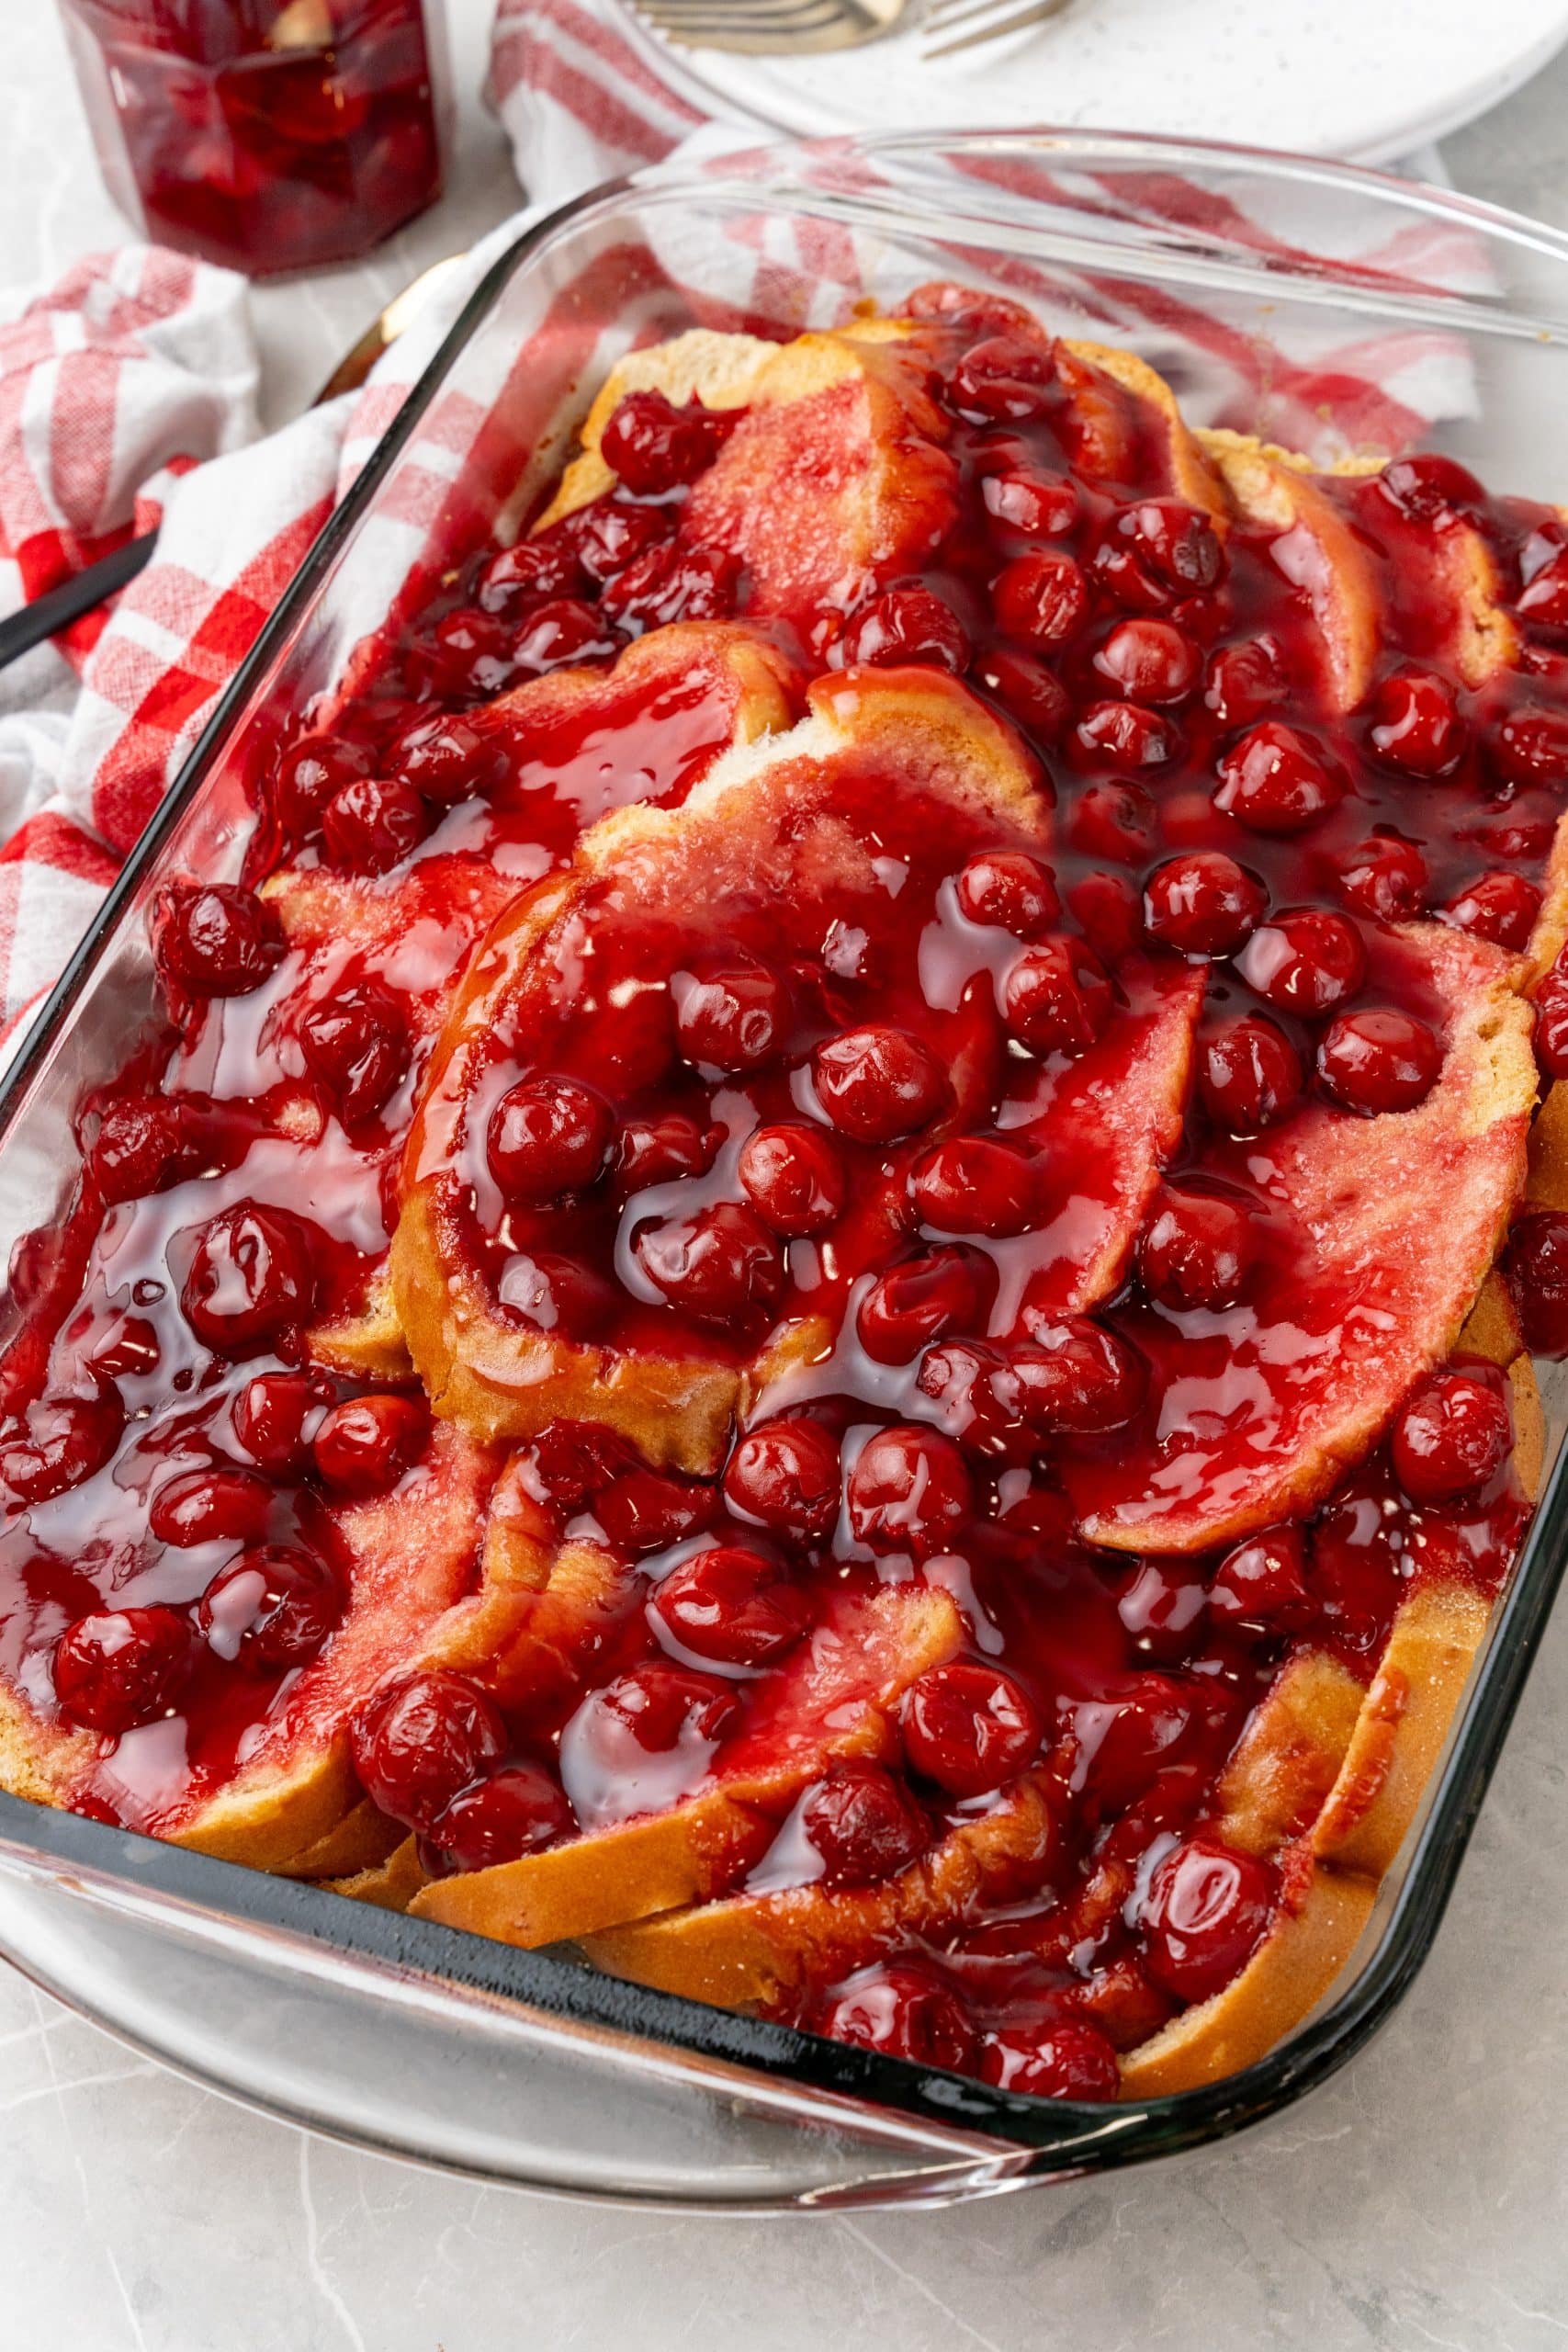 overnight cherry french toast bake in a 9x13 inch glass baking dish